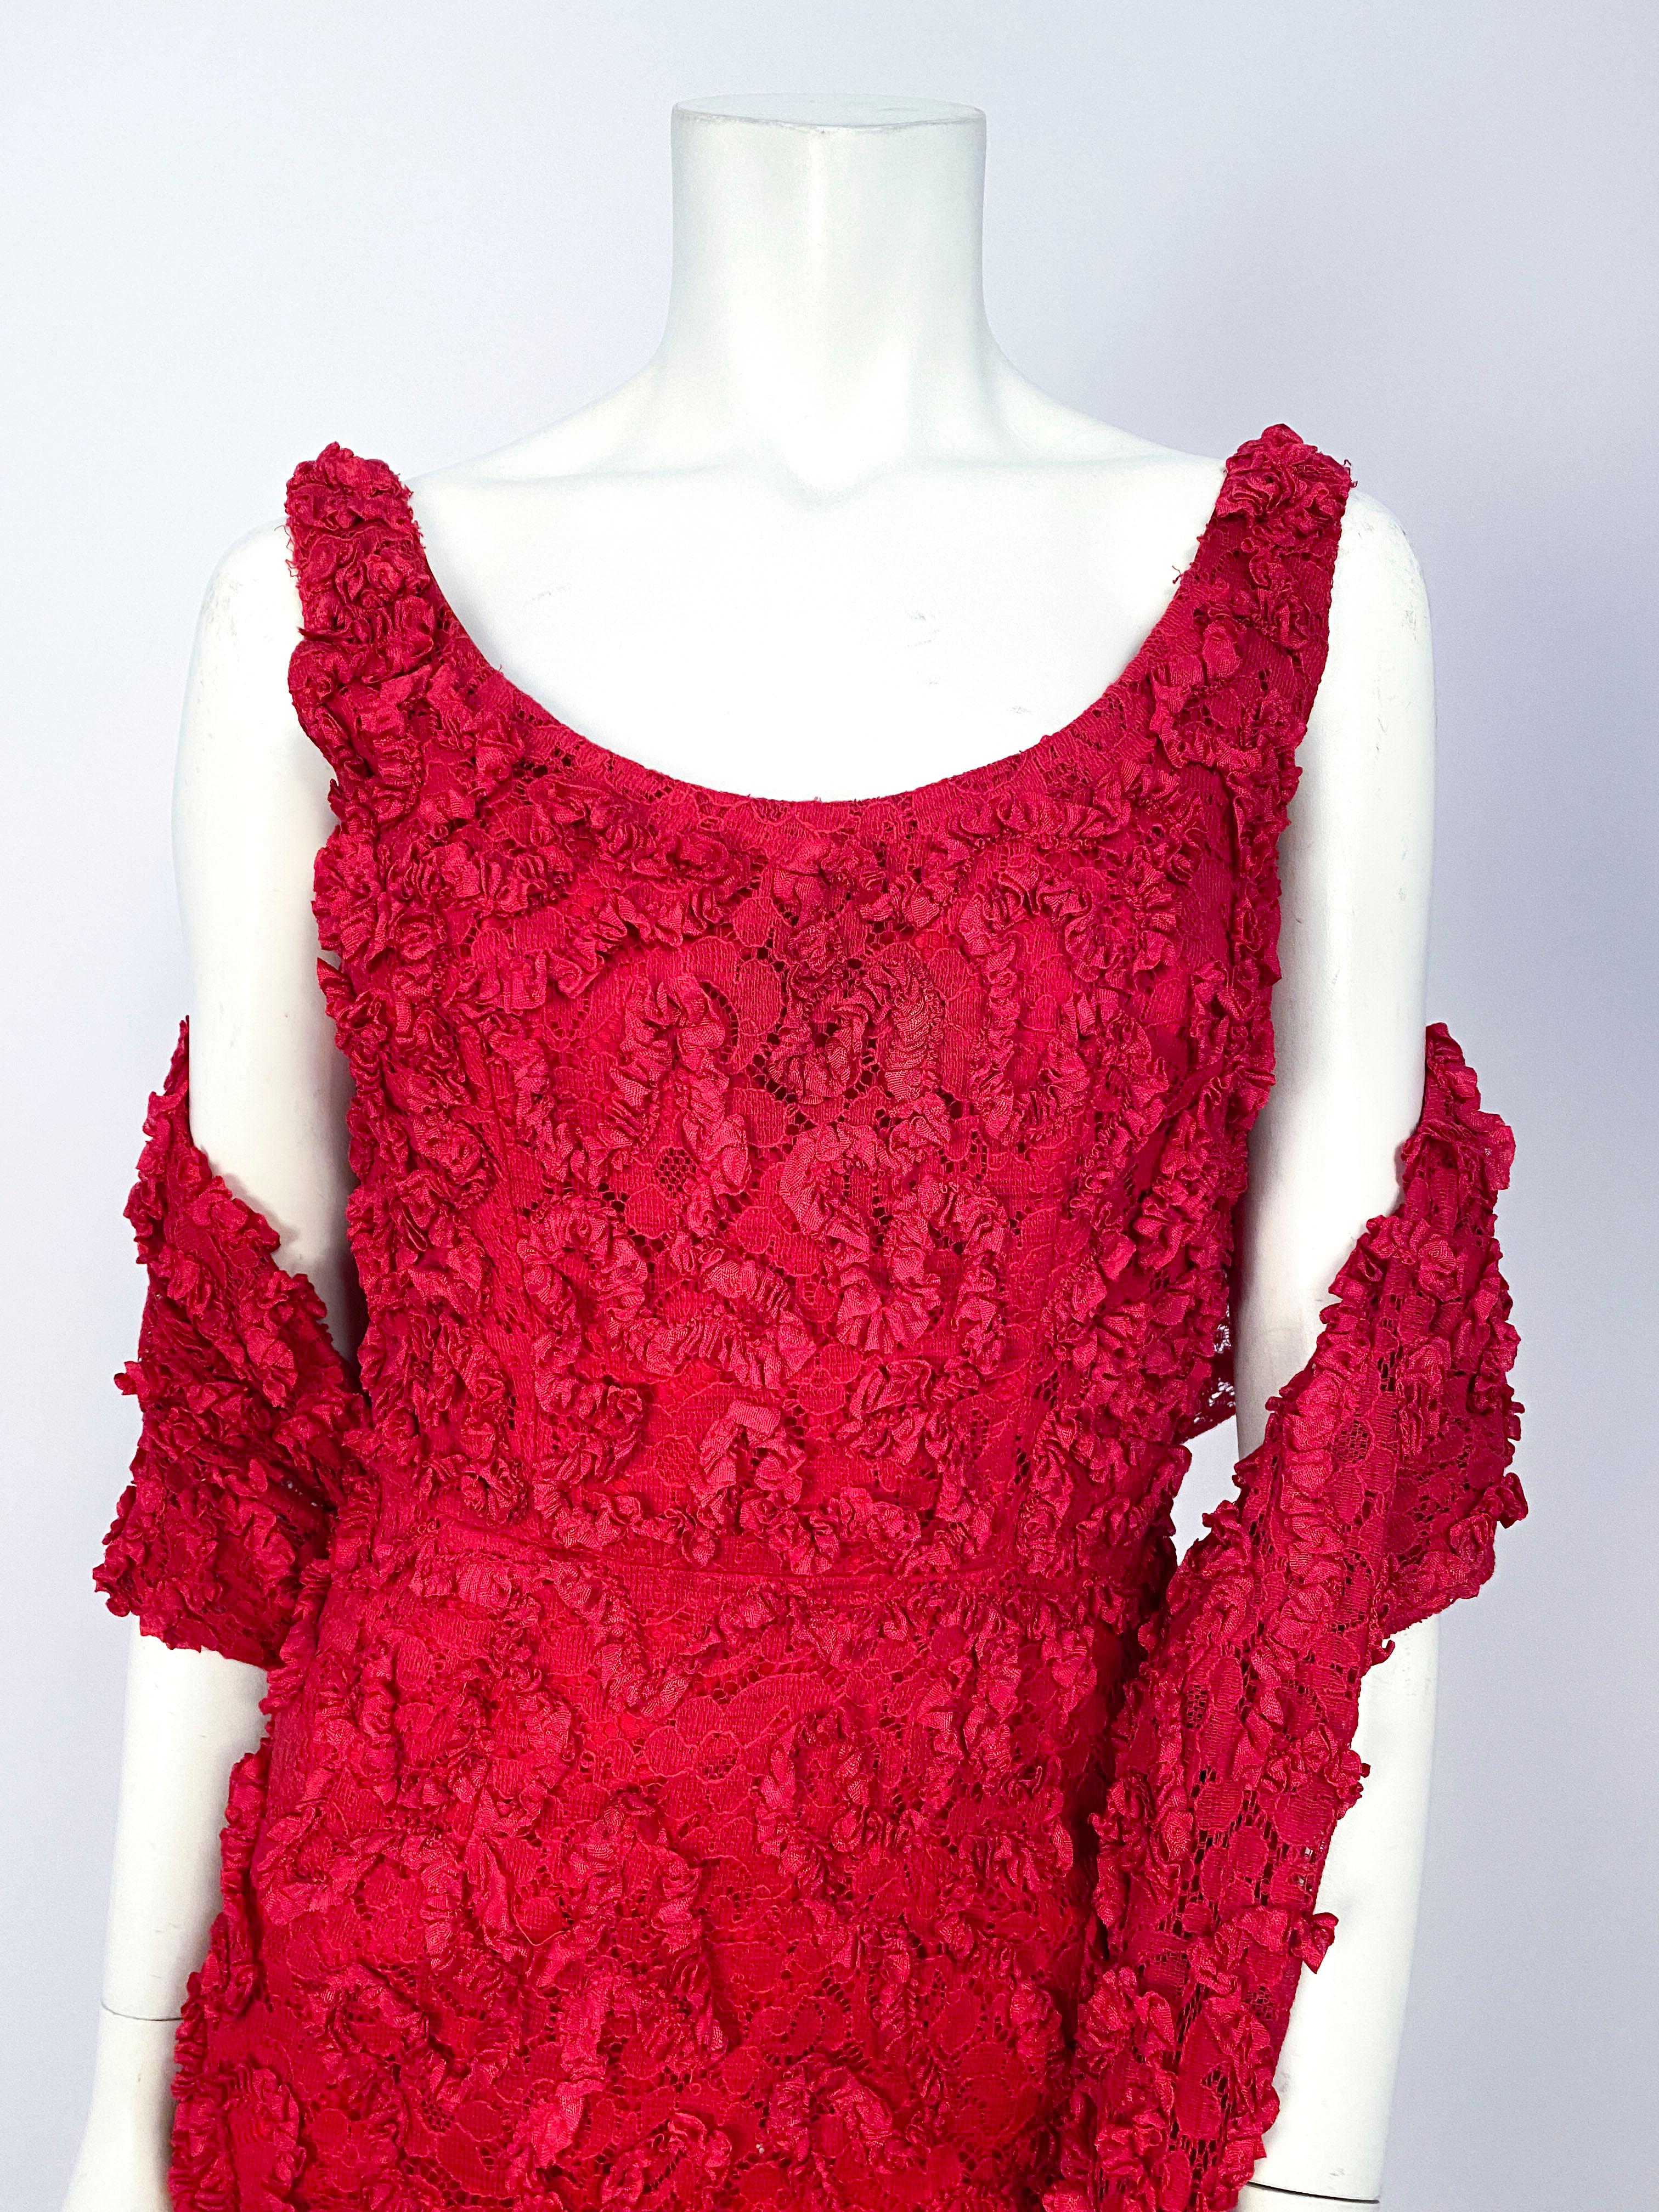 1960s red lace form-fitted cocktail dress adorned with gathered ribbon work. The matching stole is extra long and to be draped over the arms (measures 84 inches long and 14 inches wide).